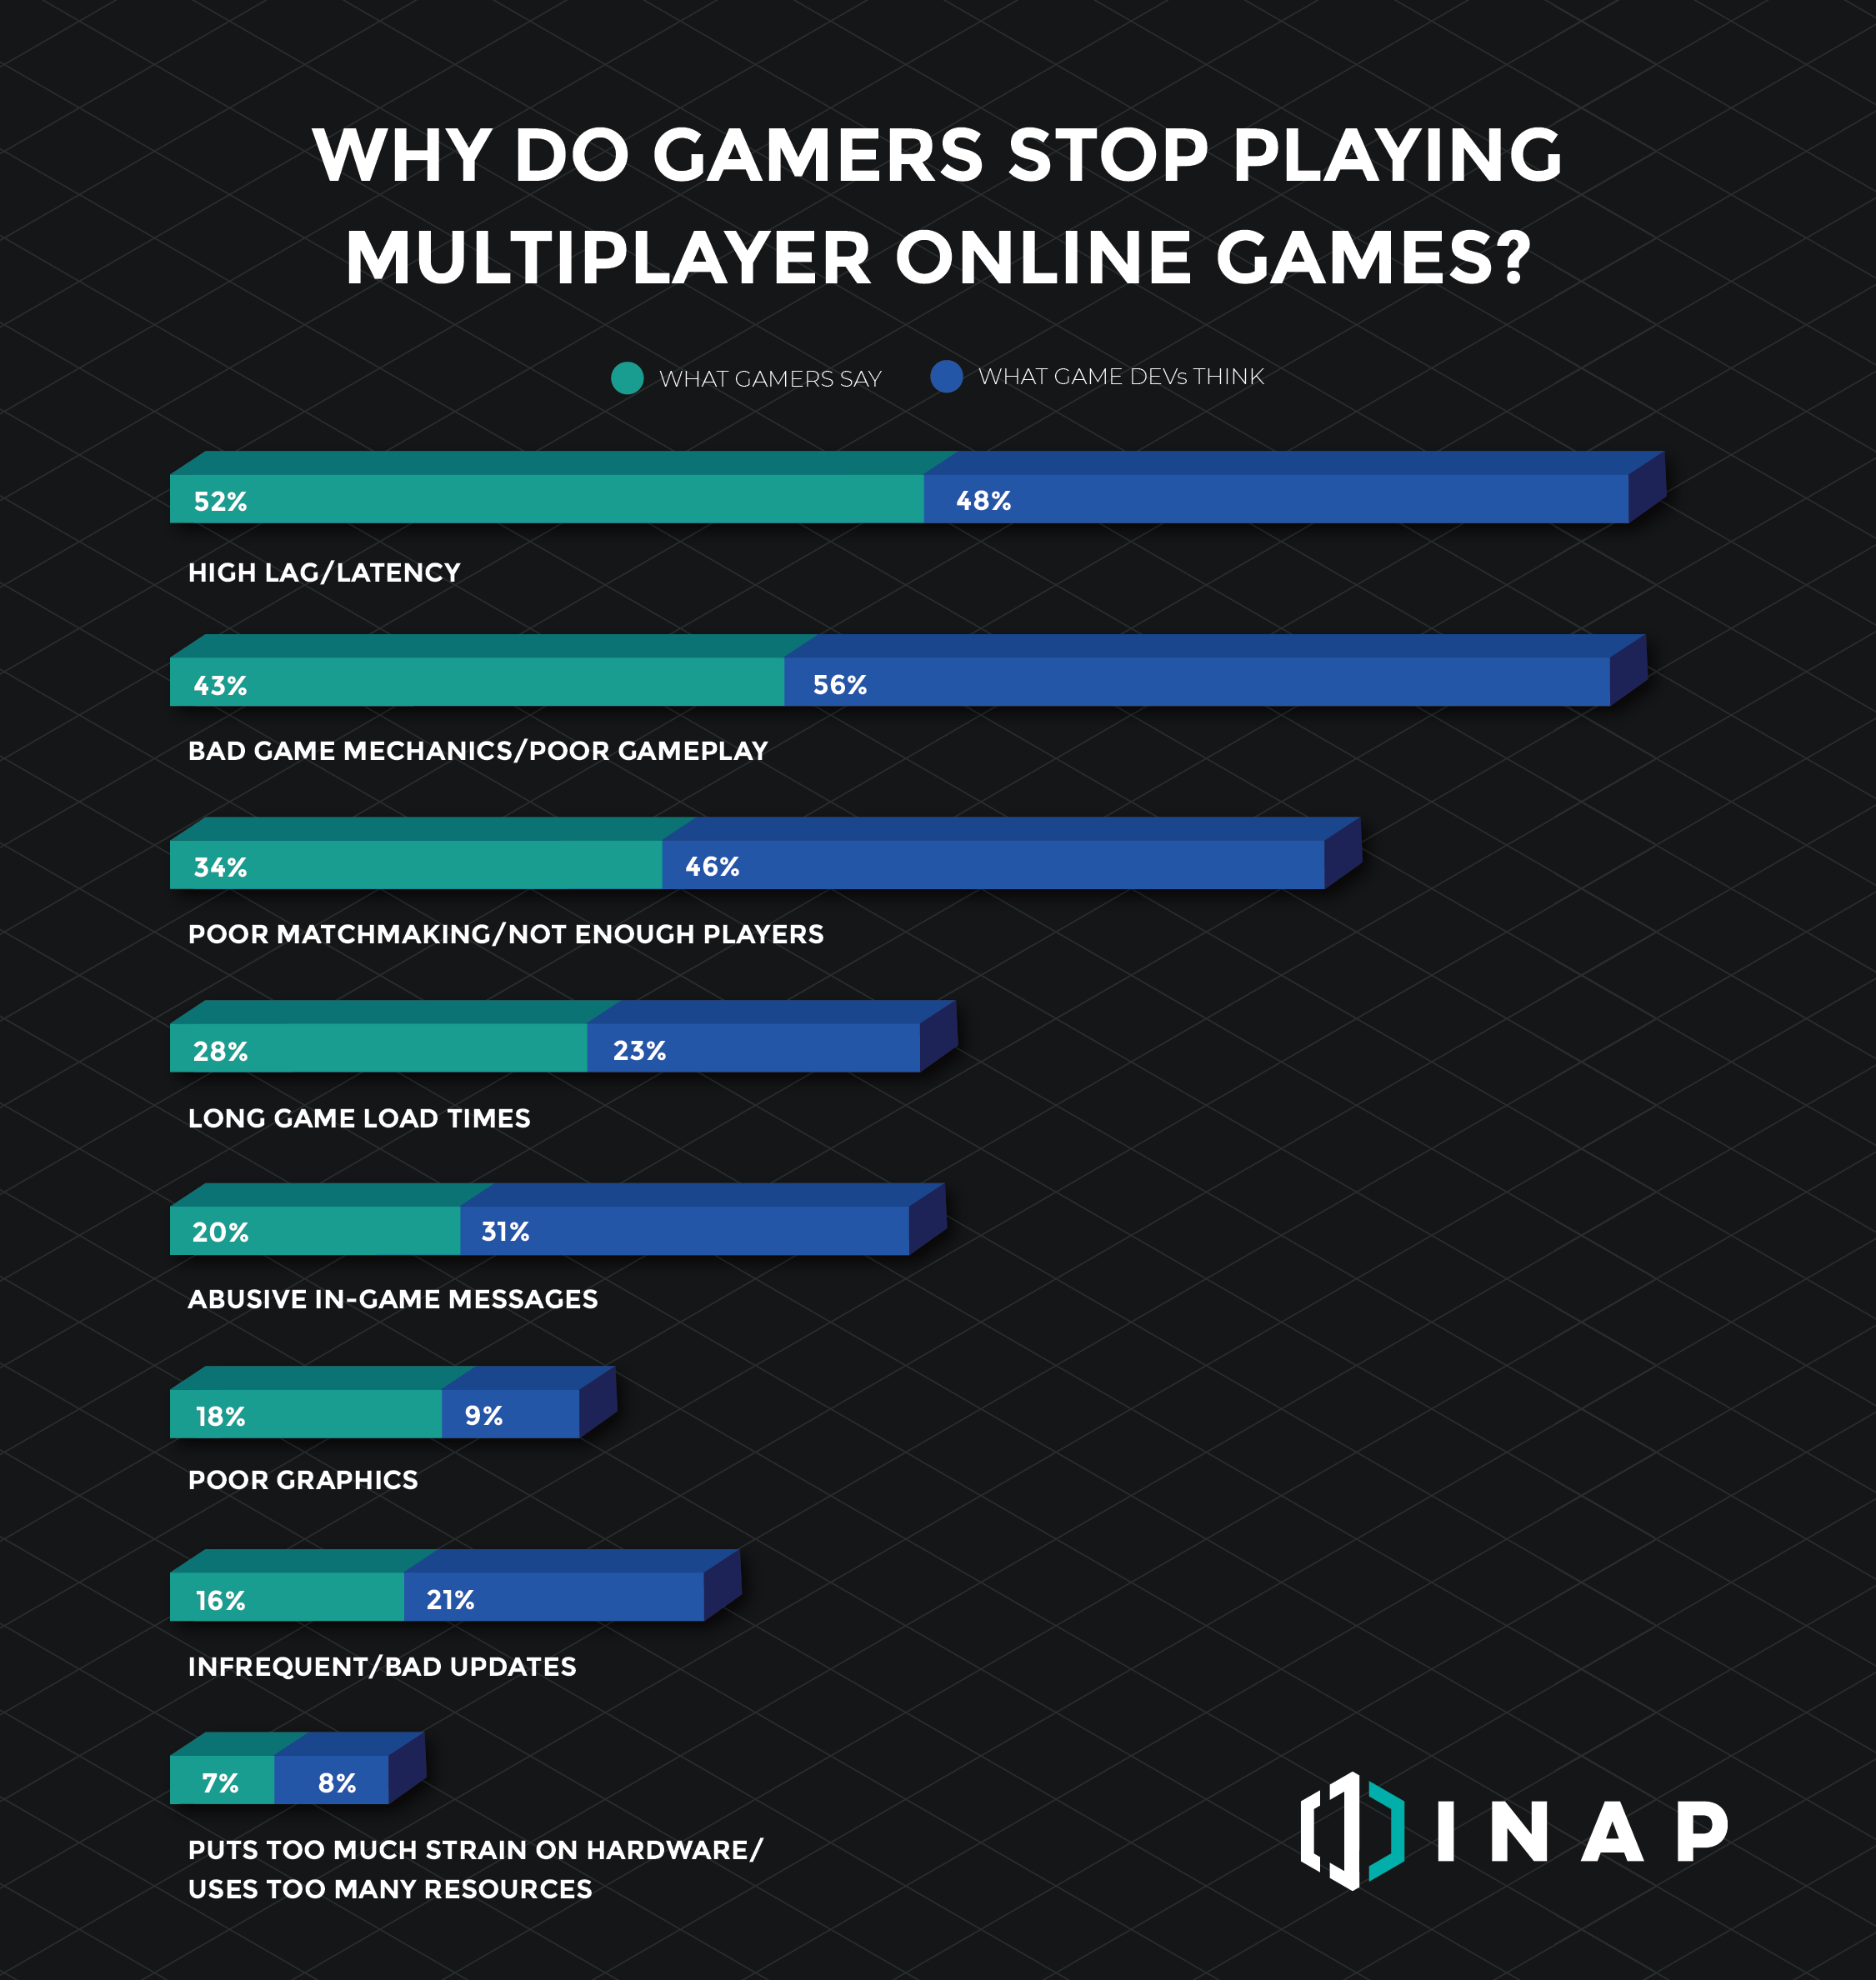 It's personal: many gamers prefer local multiplayer to online